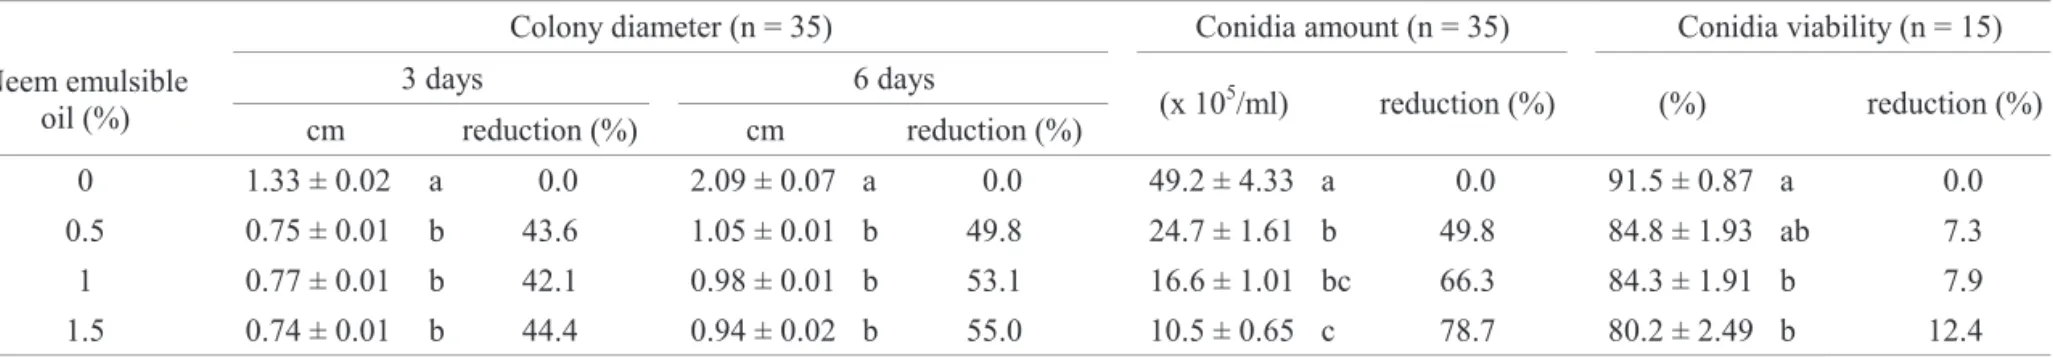 Table 2. Colonies diameter (average ± SE), average amount of conidia and viability percent, of B